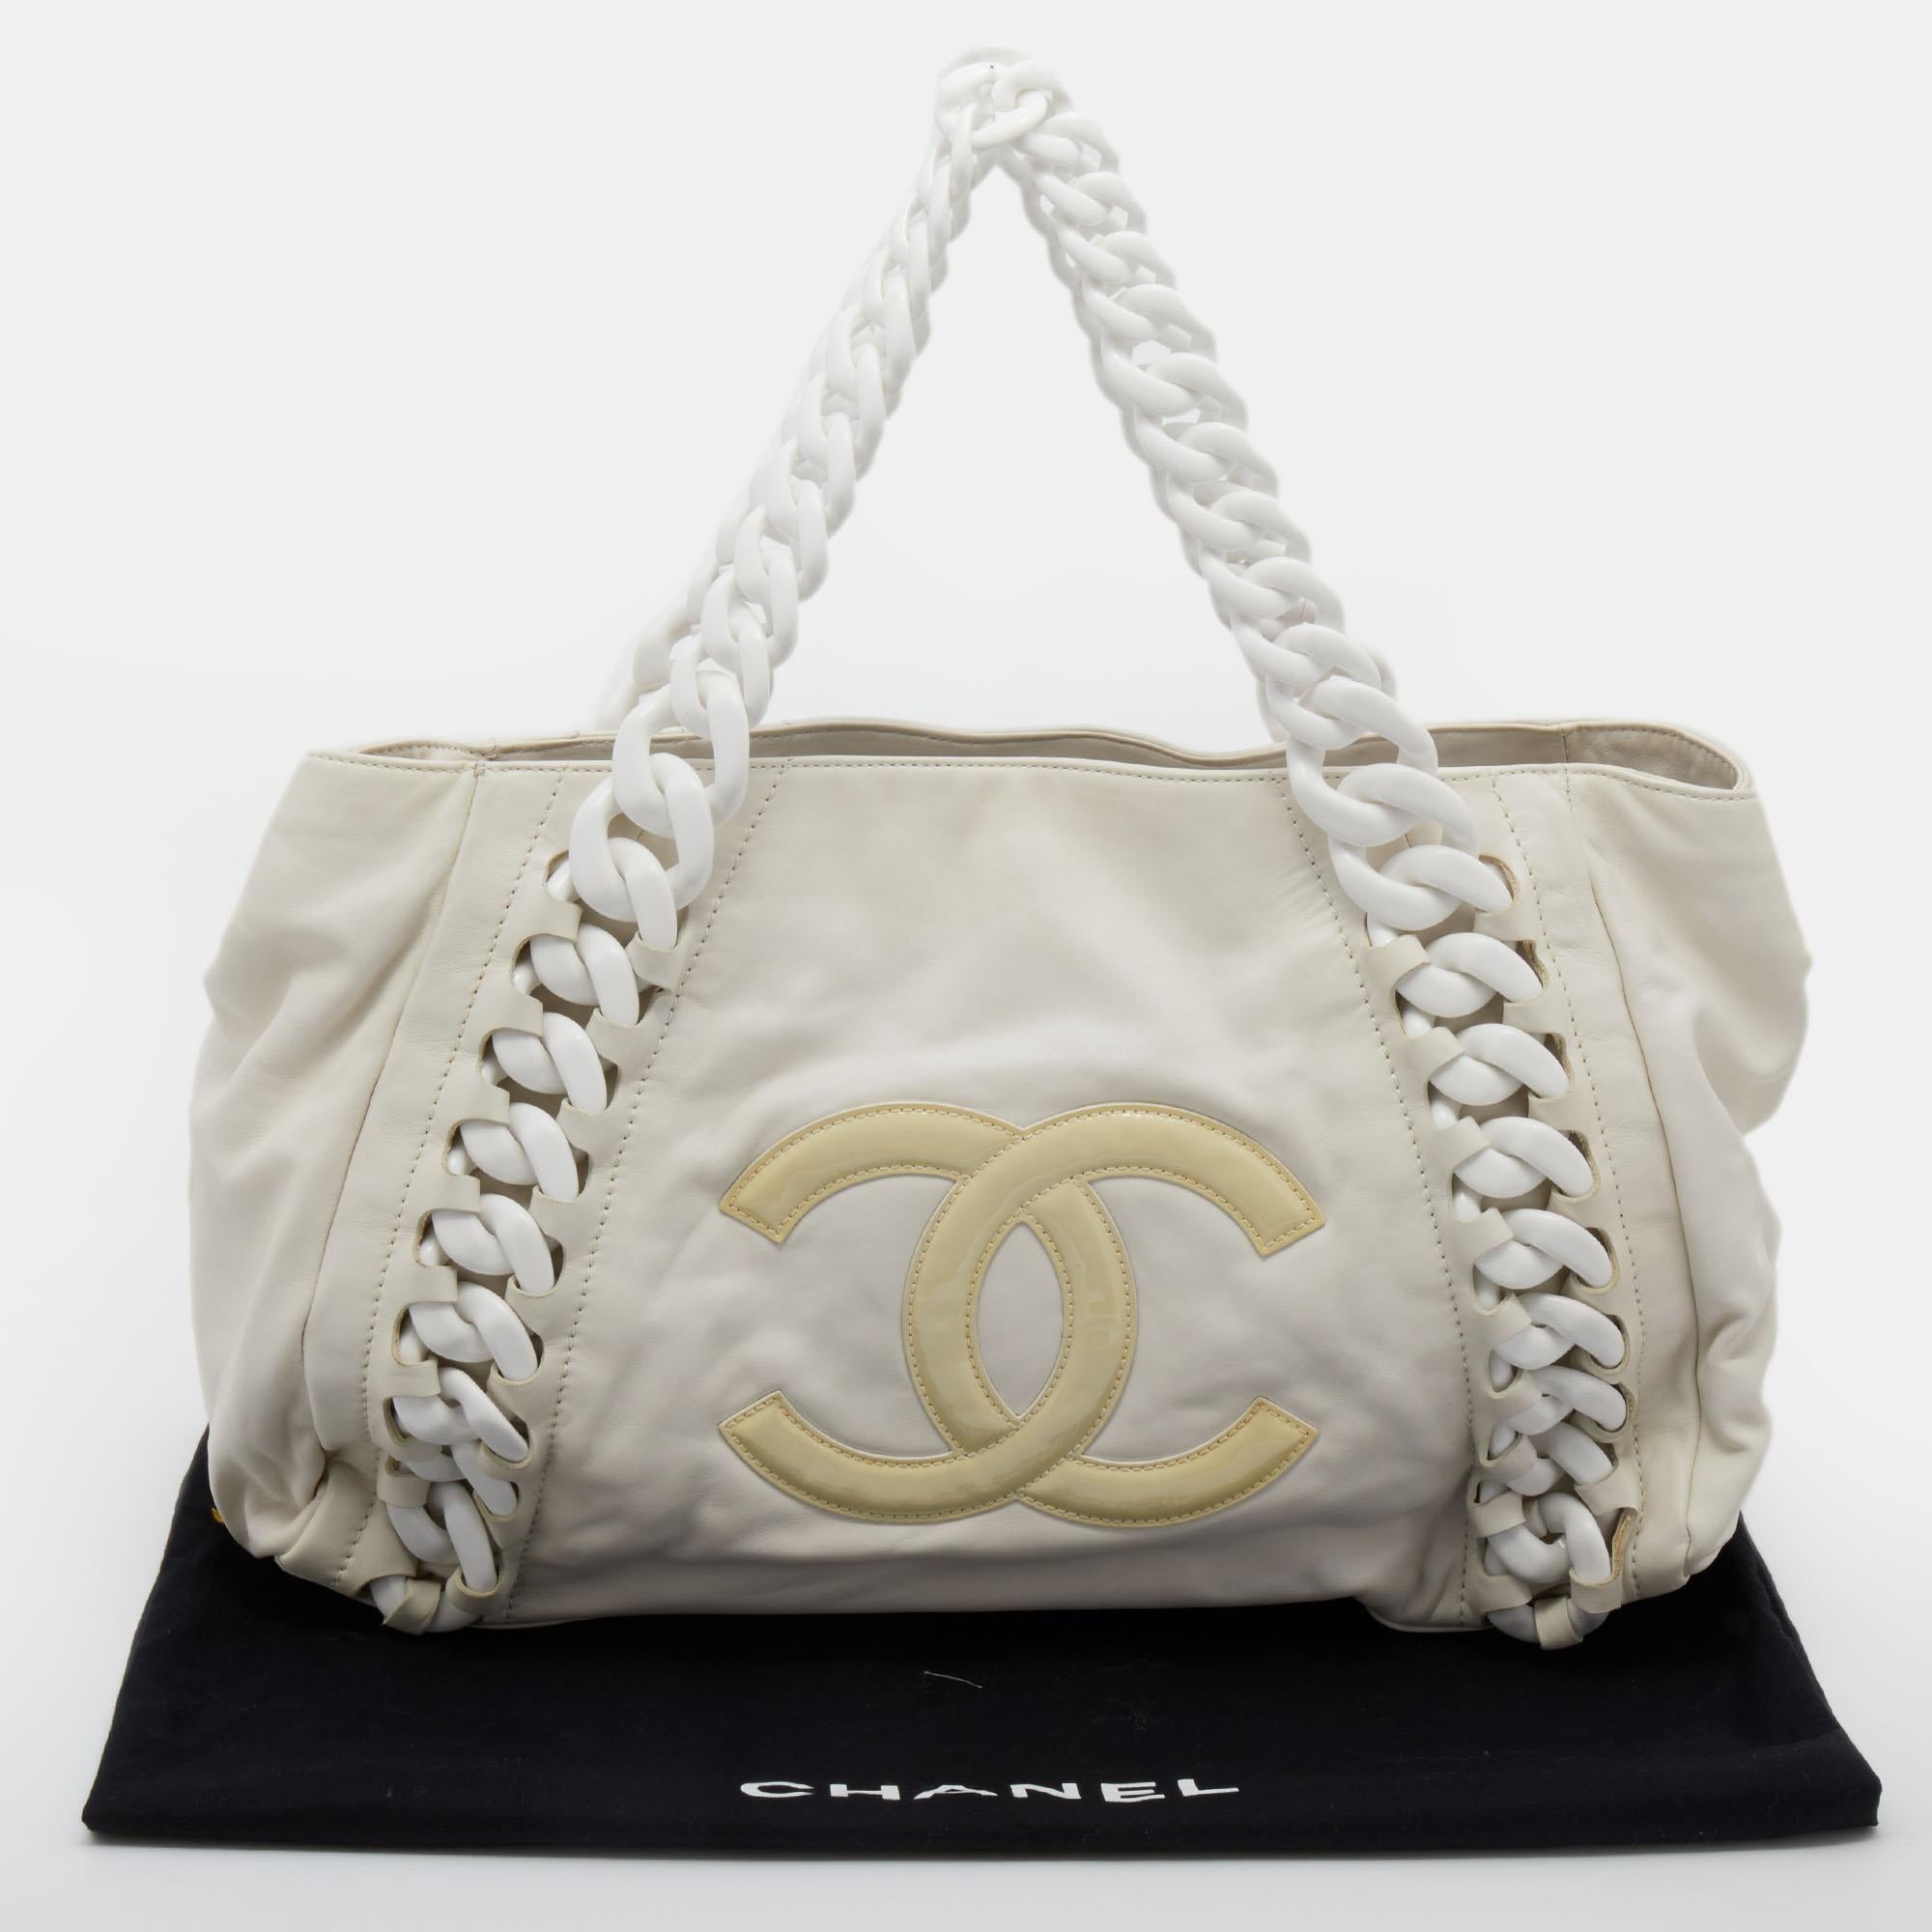 Chanel White Leather Modern Chain Rhodoid East West Tote 1